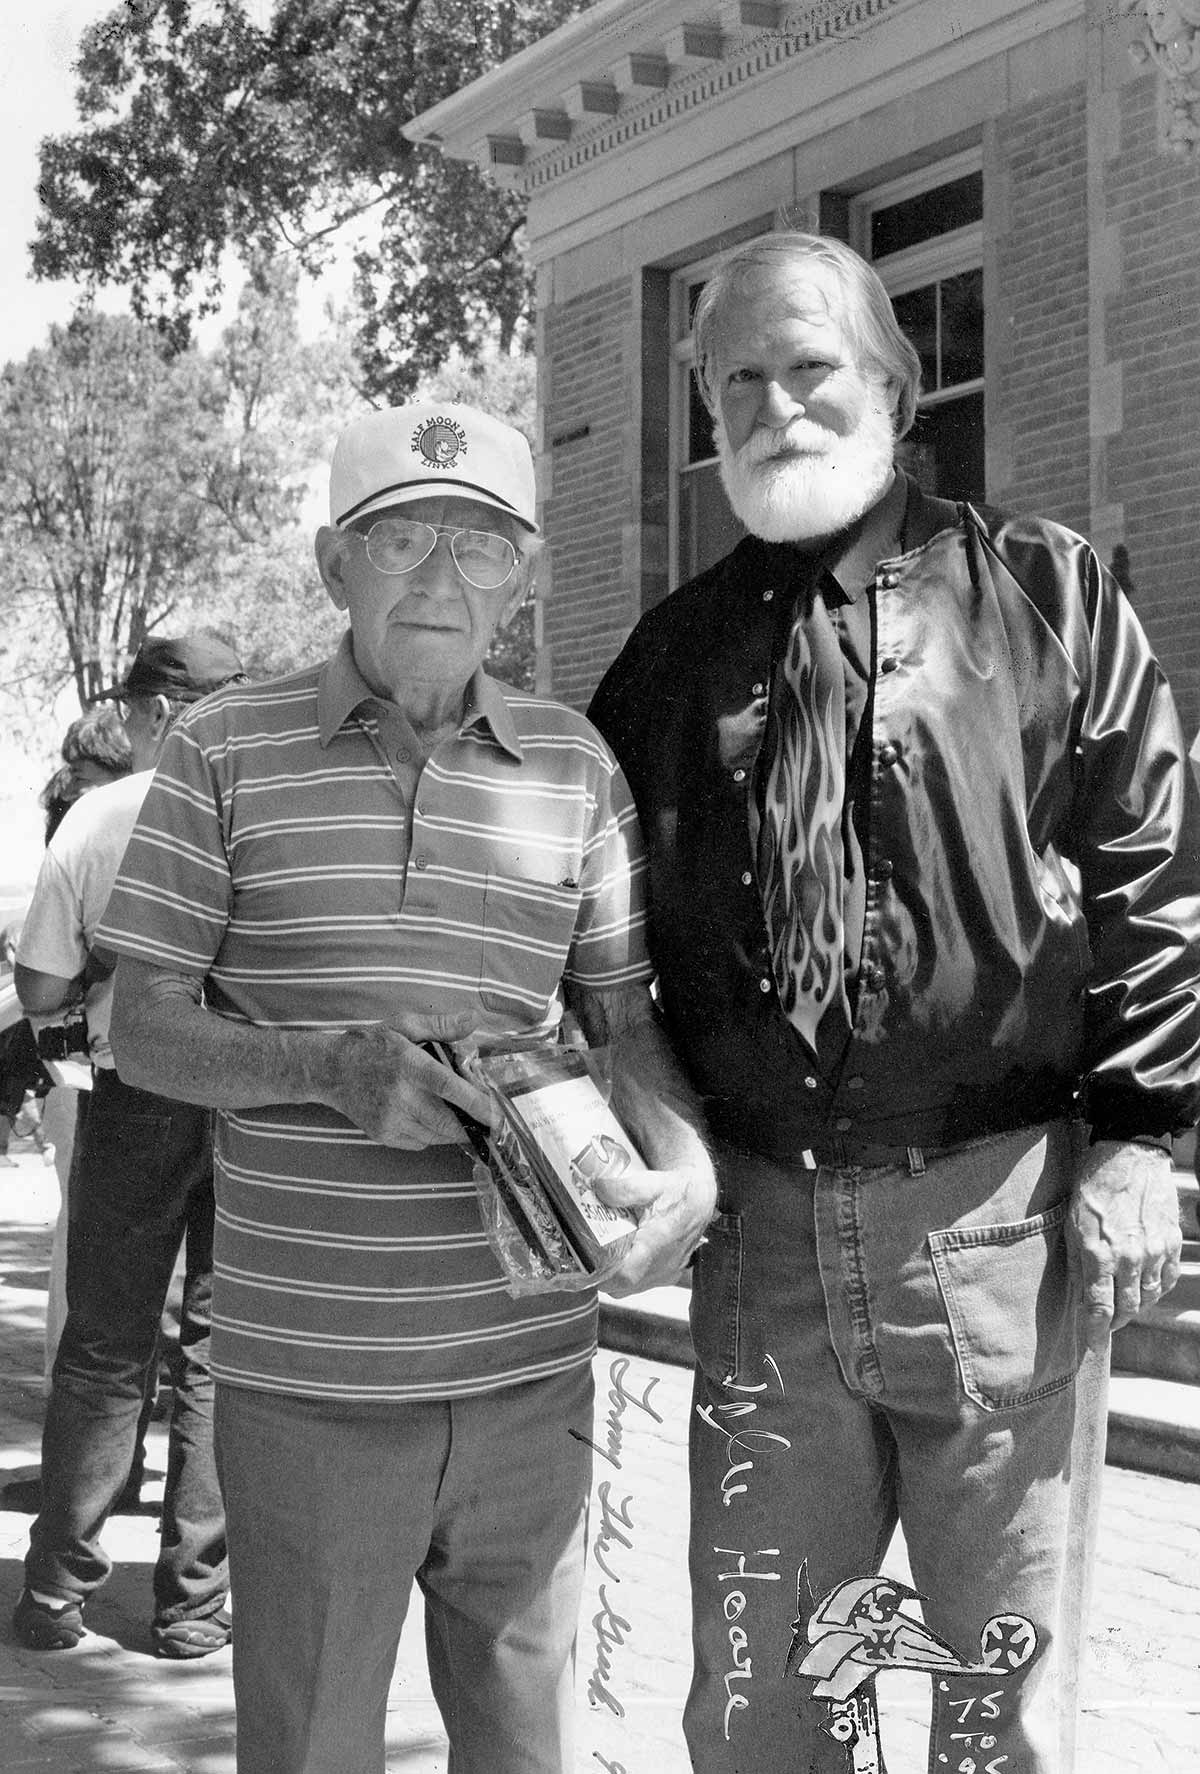 Black & white photograph of sculptor and custom car enthusiast Tyler Hoare meeting Tommy in the mid ’70s and later made sure he attended the West Coast Kustoms events in Paso Robles, where, in 1998, Tommy was inducted into the event’s Hall of Fame. Hoare also helped stage the annual Tommy The Greek lunch at now-gone Pier 29 on the Oakland Estuary. Hoare, of Berkeley, is celebrated for his Snoopy/Red Baron sculptures in the tidal flats of East Bay shoreline, among other public artworks.